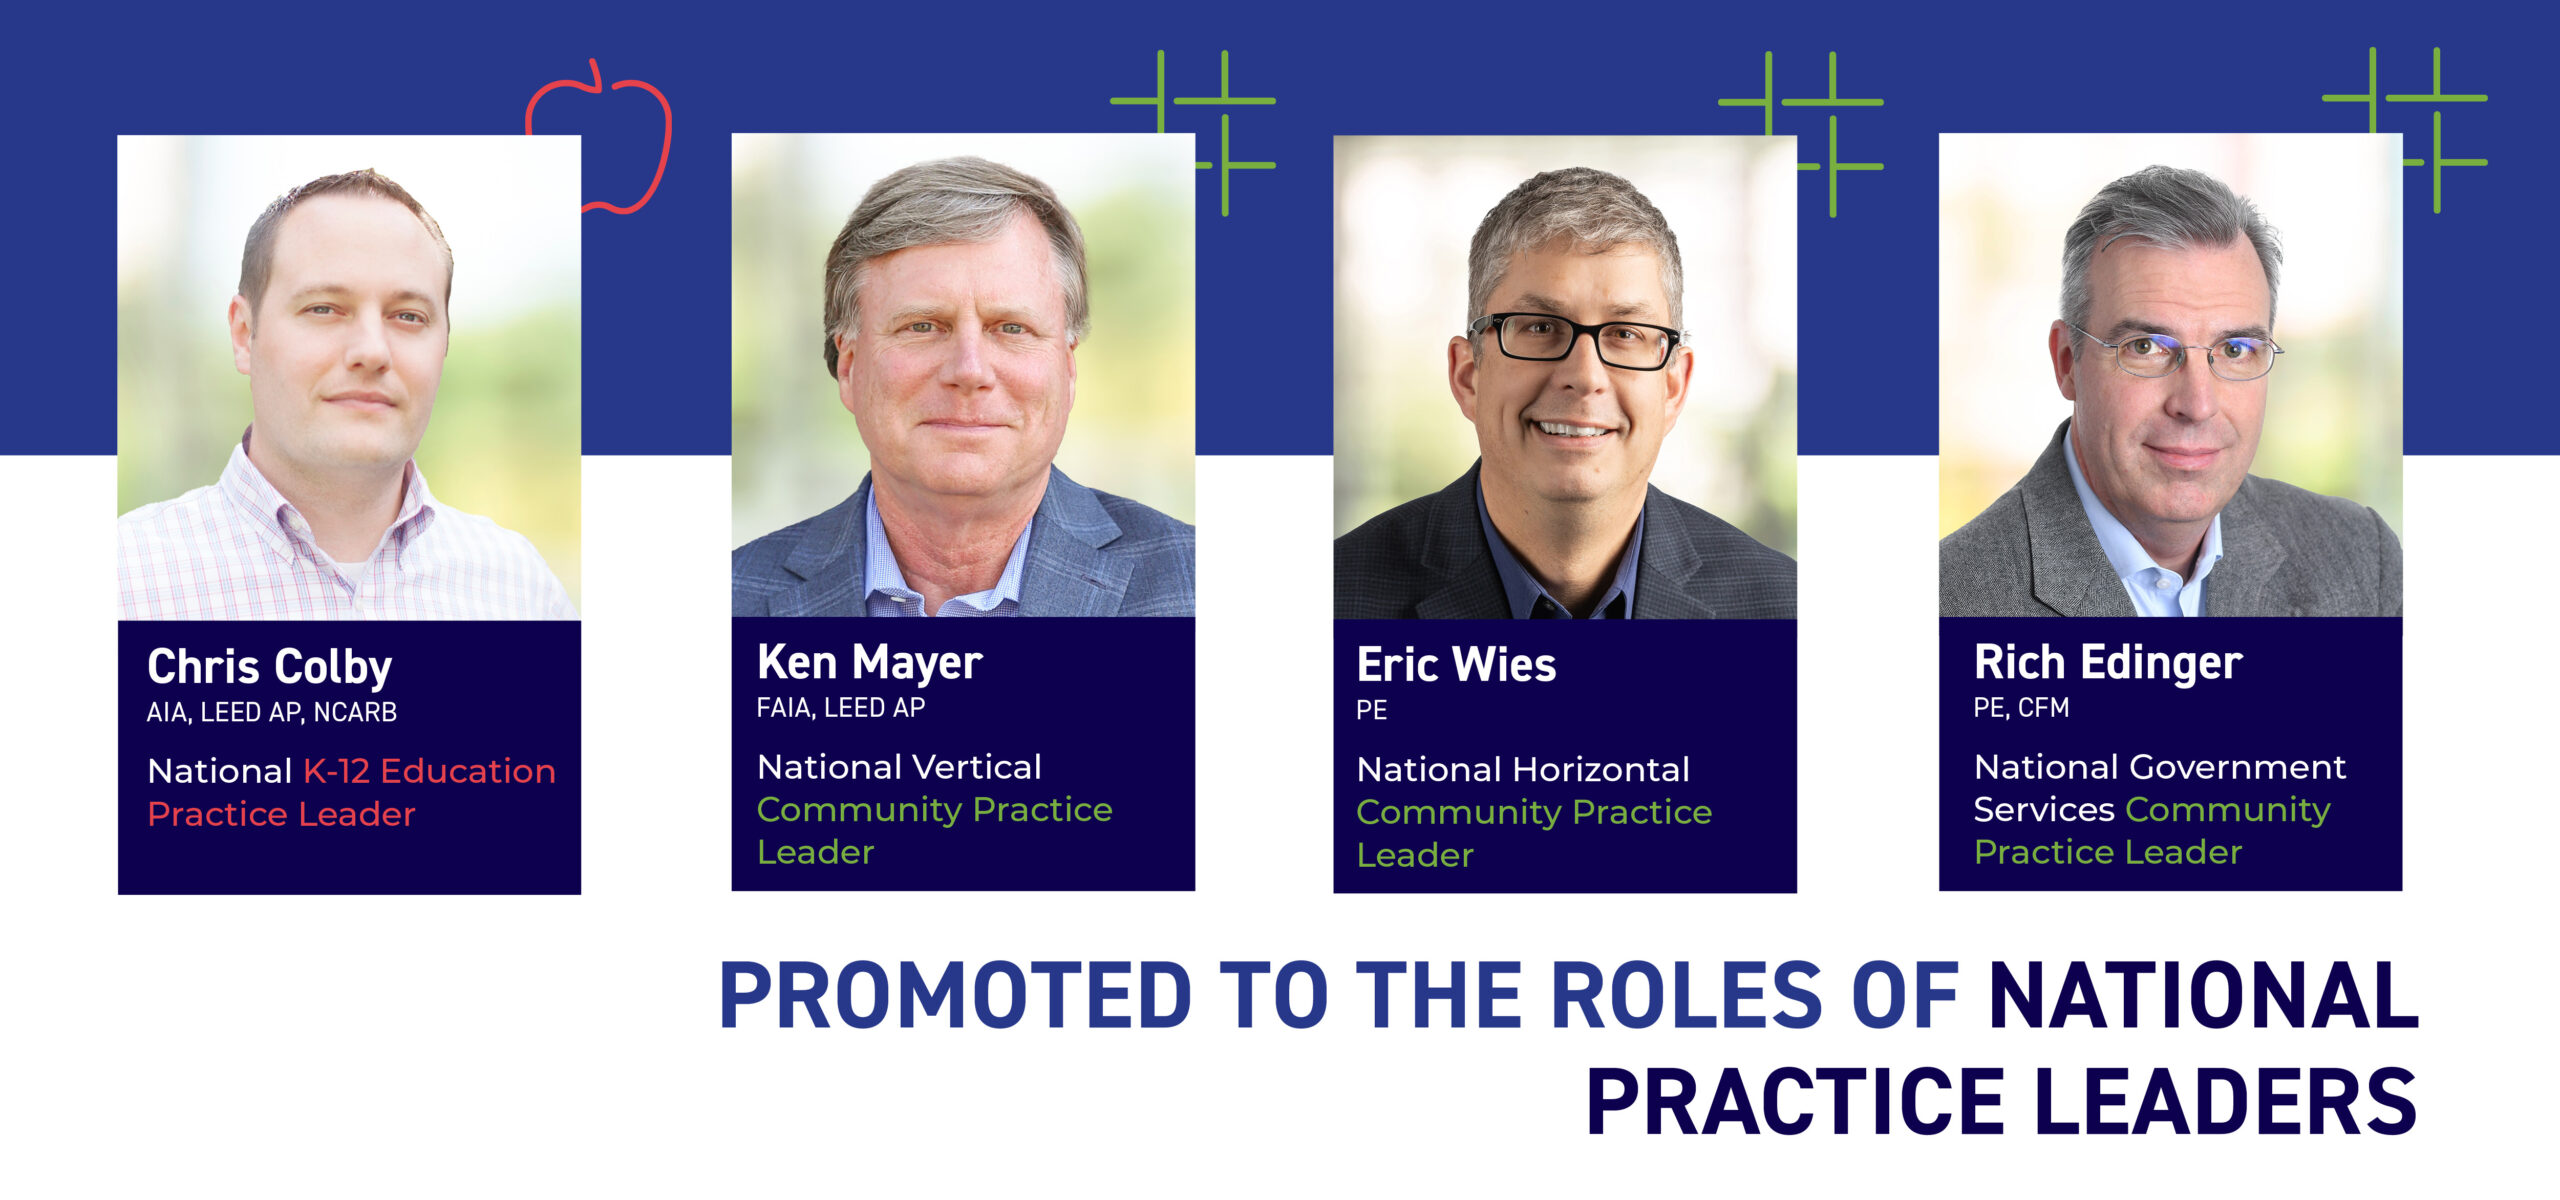 A graphic with three men shown along with boxes below them and their titles. The first one reads "Chris Colby AIA, LEED AP, NCARB - National K-12 Education Practice Leader" Next is a picture of an older man under it reads "Ken Mayer FAIA, LEED AP - National Vertical Community Practice Leader." Next to him is a man wearing glasses and below him it reads "Eric Wies PE National Horizontal Community Practice Leader." Finally another man wearing glasses and below him reads "Rich Edinger PE, DFM, National Government Services Community Practice Leader." At the bottom of the graphic it reads "Promoted to the roles of National Practice Leaders."